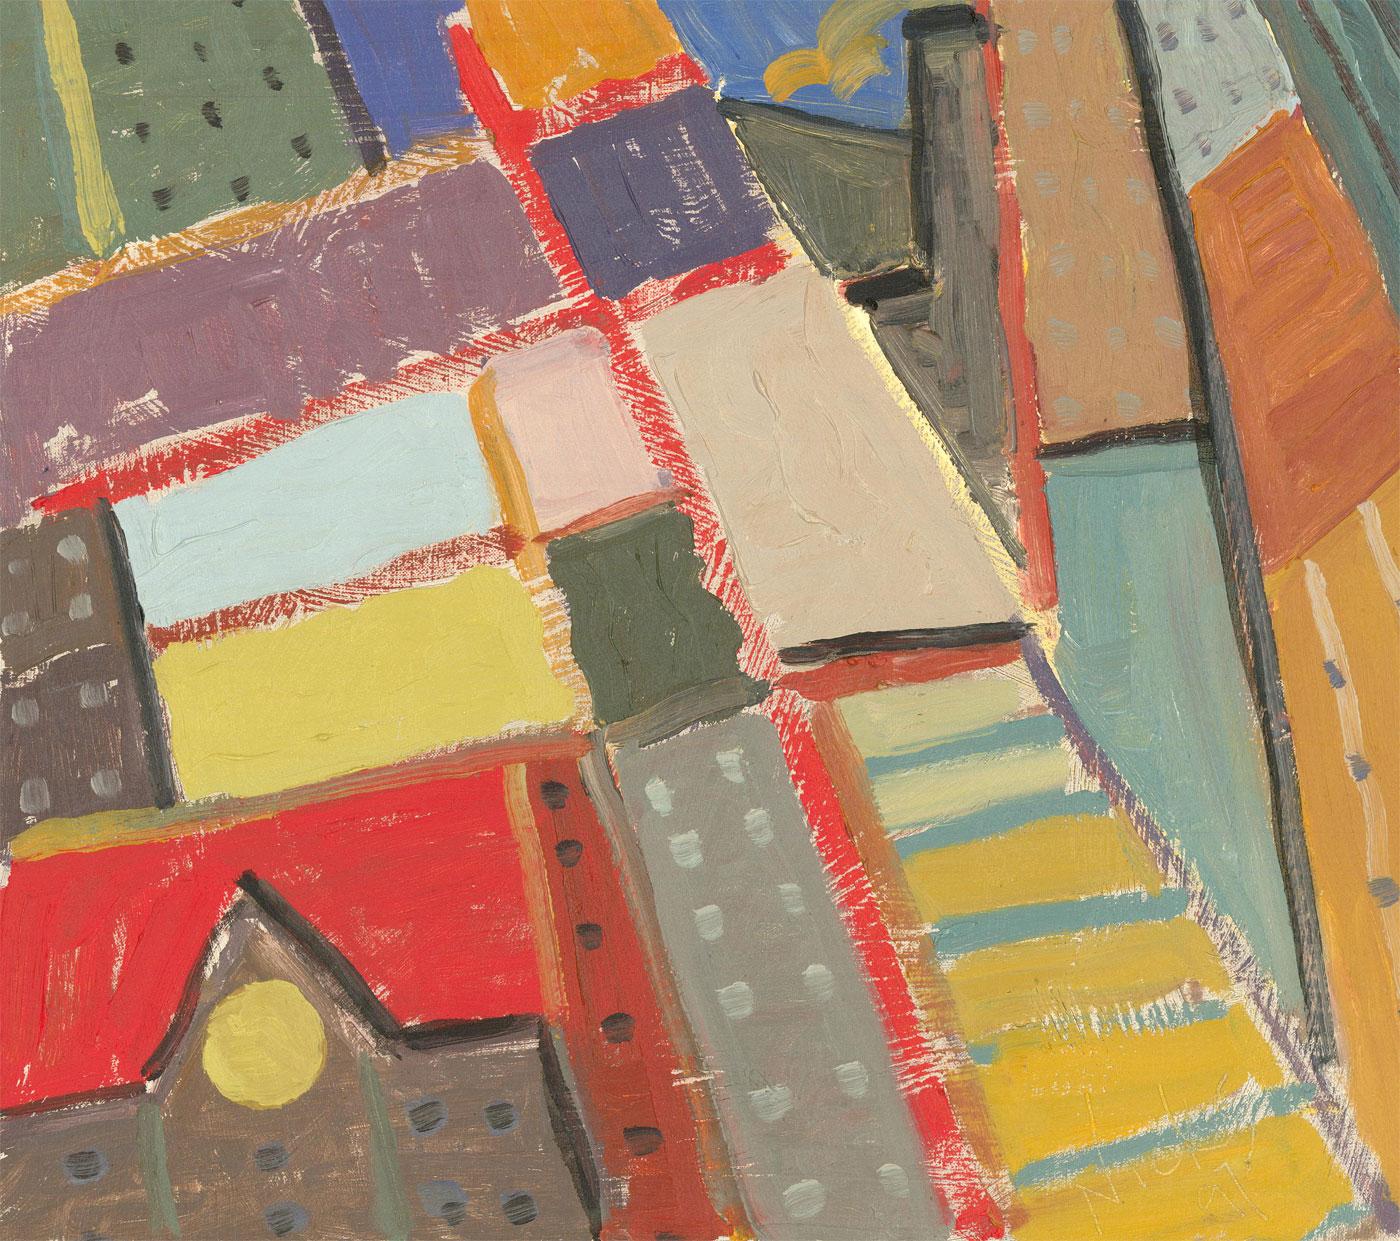 A vibrant and joyful abstract take on a busy metropolis. The artist has broken up the forms of city buildings into geometric, interlocking shapes, with glimpses of recognisable architectural elements adding a twist of naive reality to the abstract